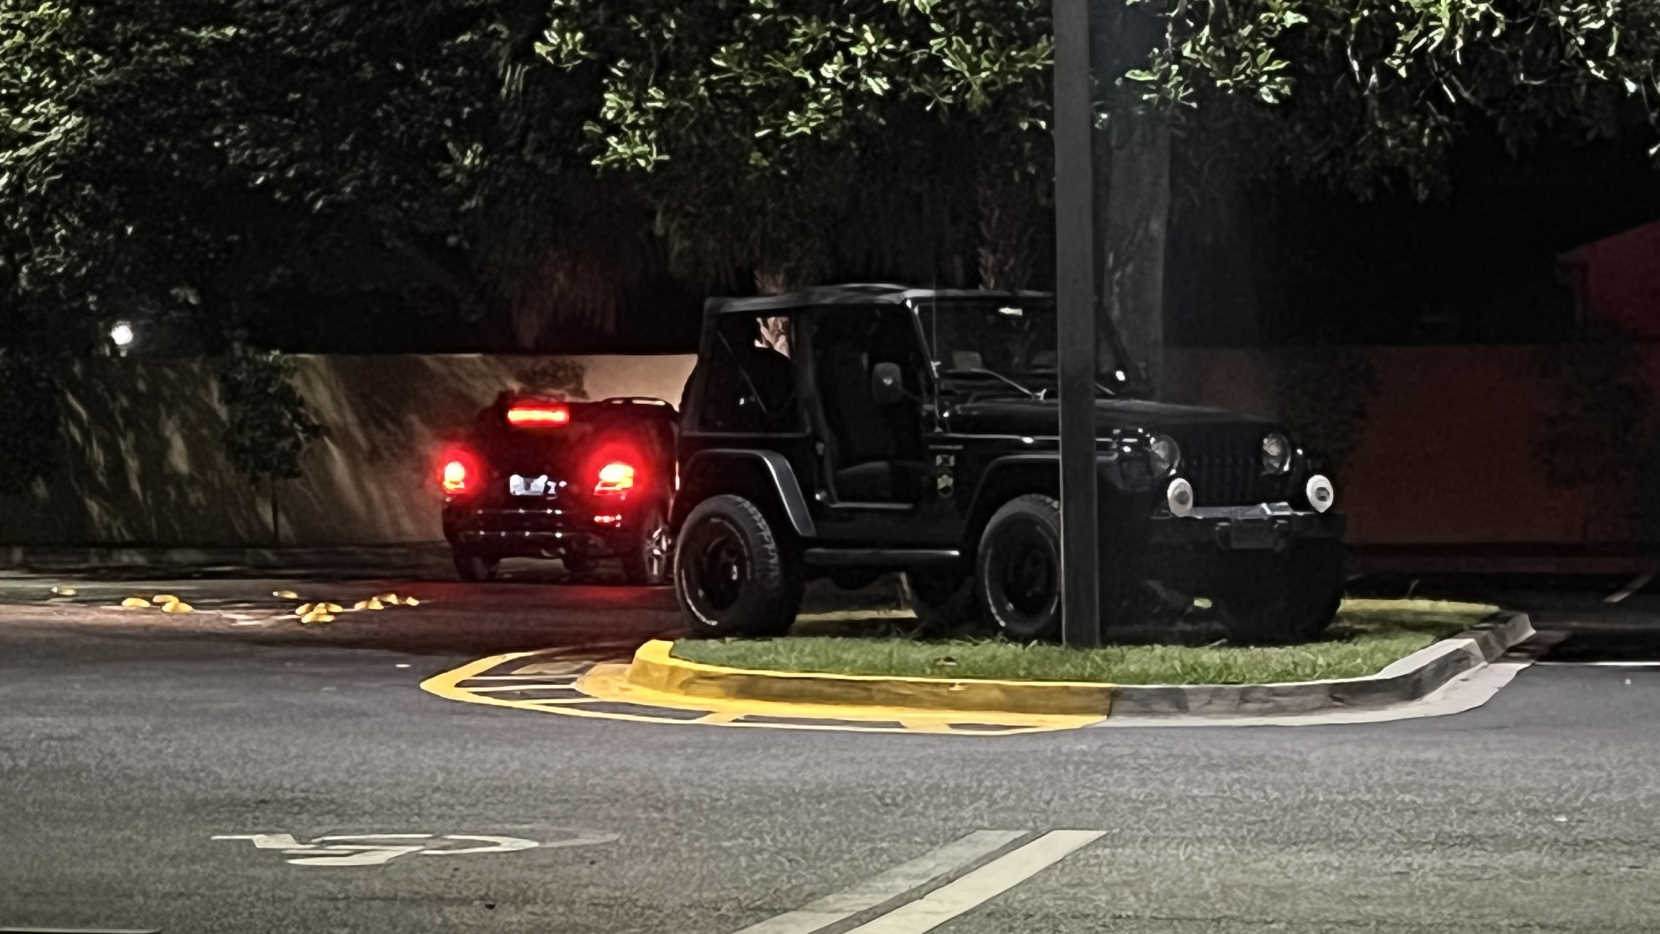 A Jeep, parked on a parking lot grass island.